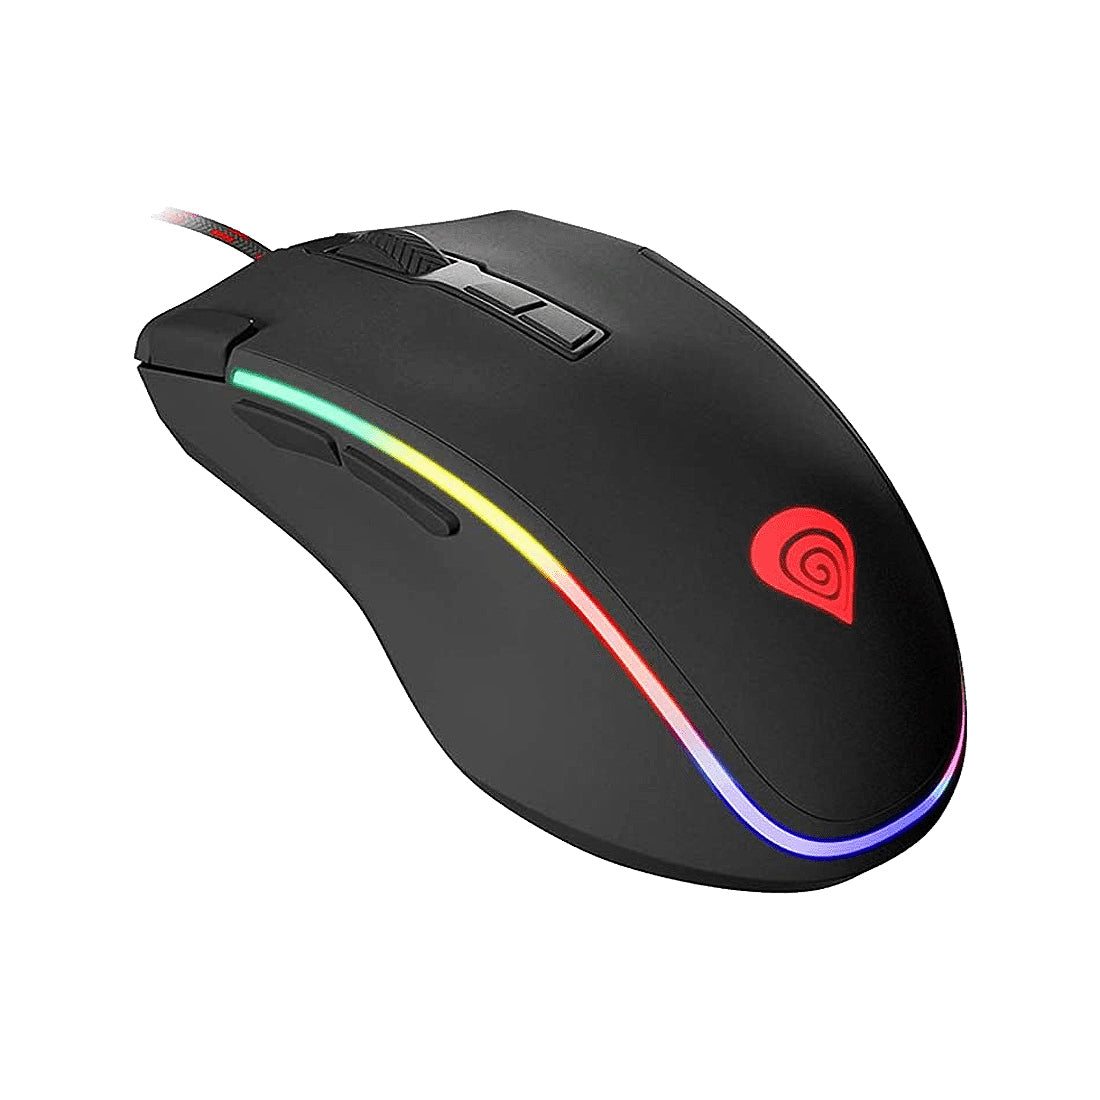 Genesis Krypton 700 NMG-0905 Optical Gaming Mouse (New) Best laptop mouse, computer mouse, gaming mouse, professional mouse, mouse for sale in Lebanon, mouse in Lebanon, RGB mouse, laptops king lebanon